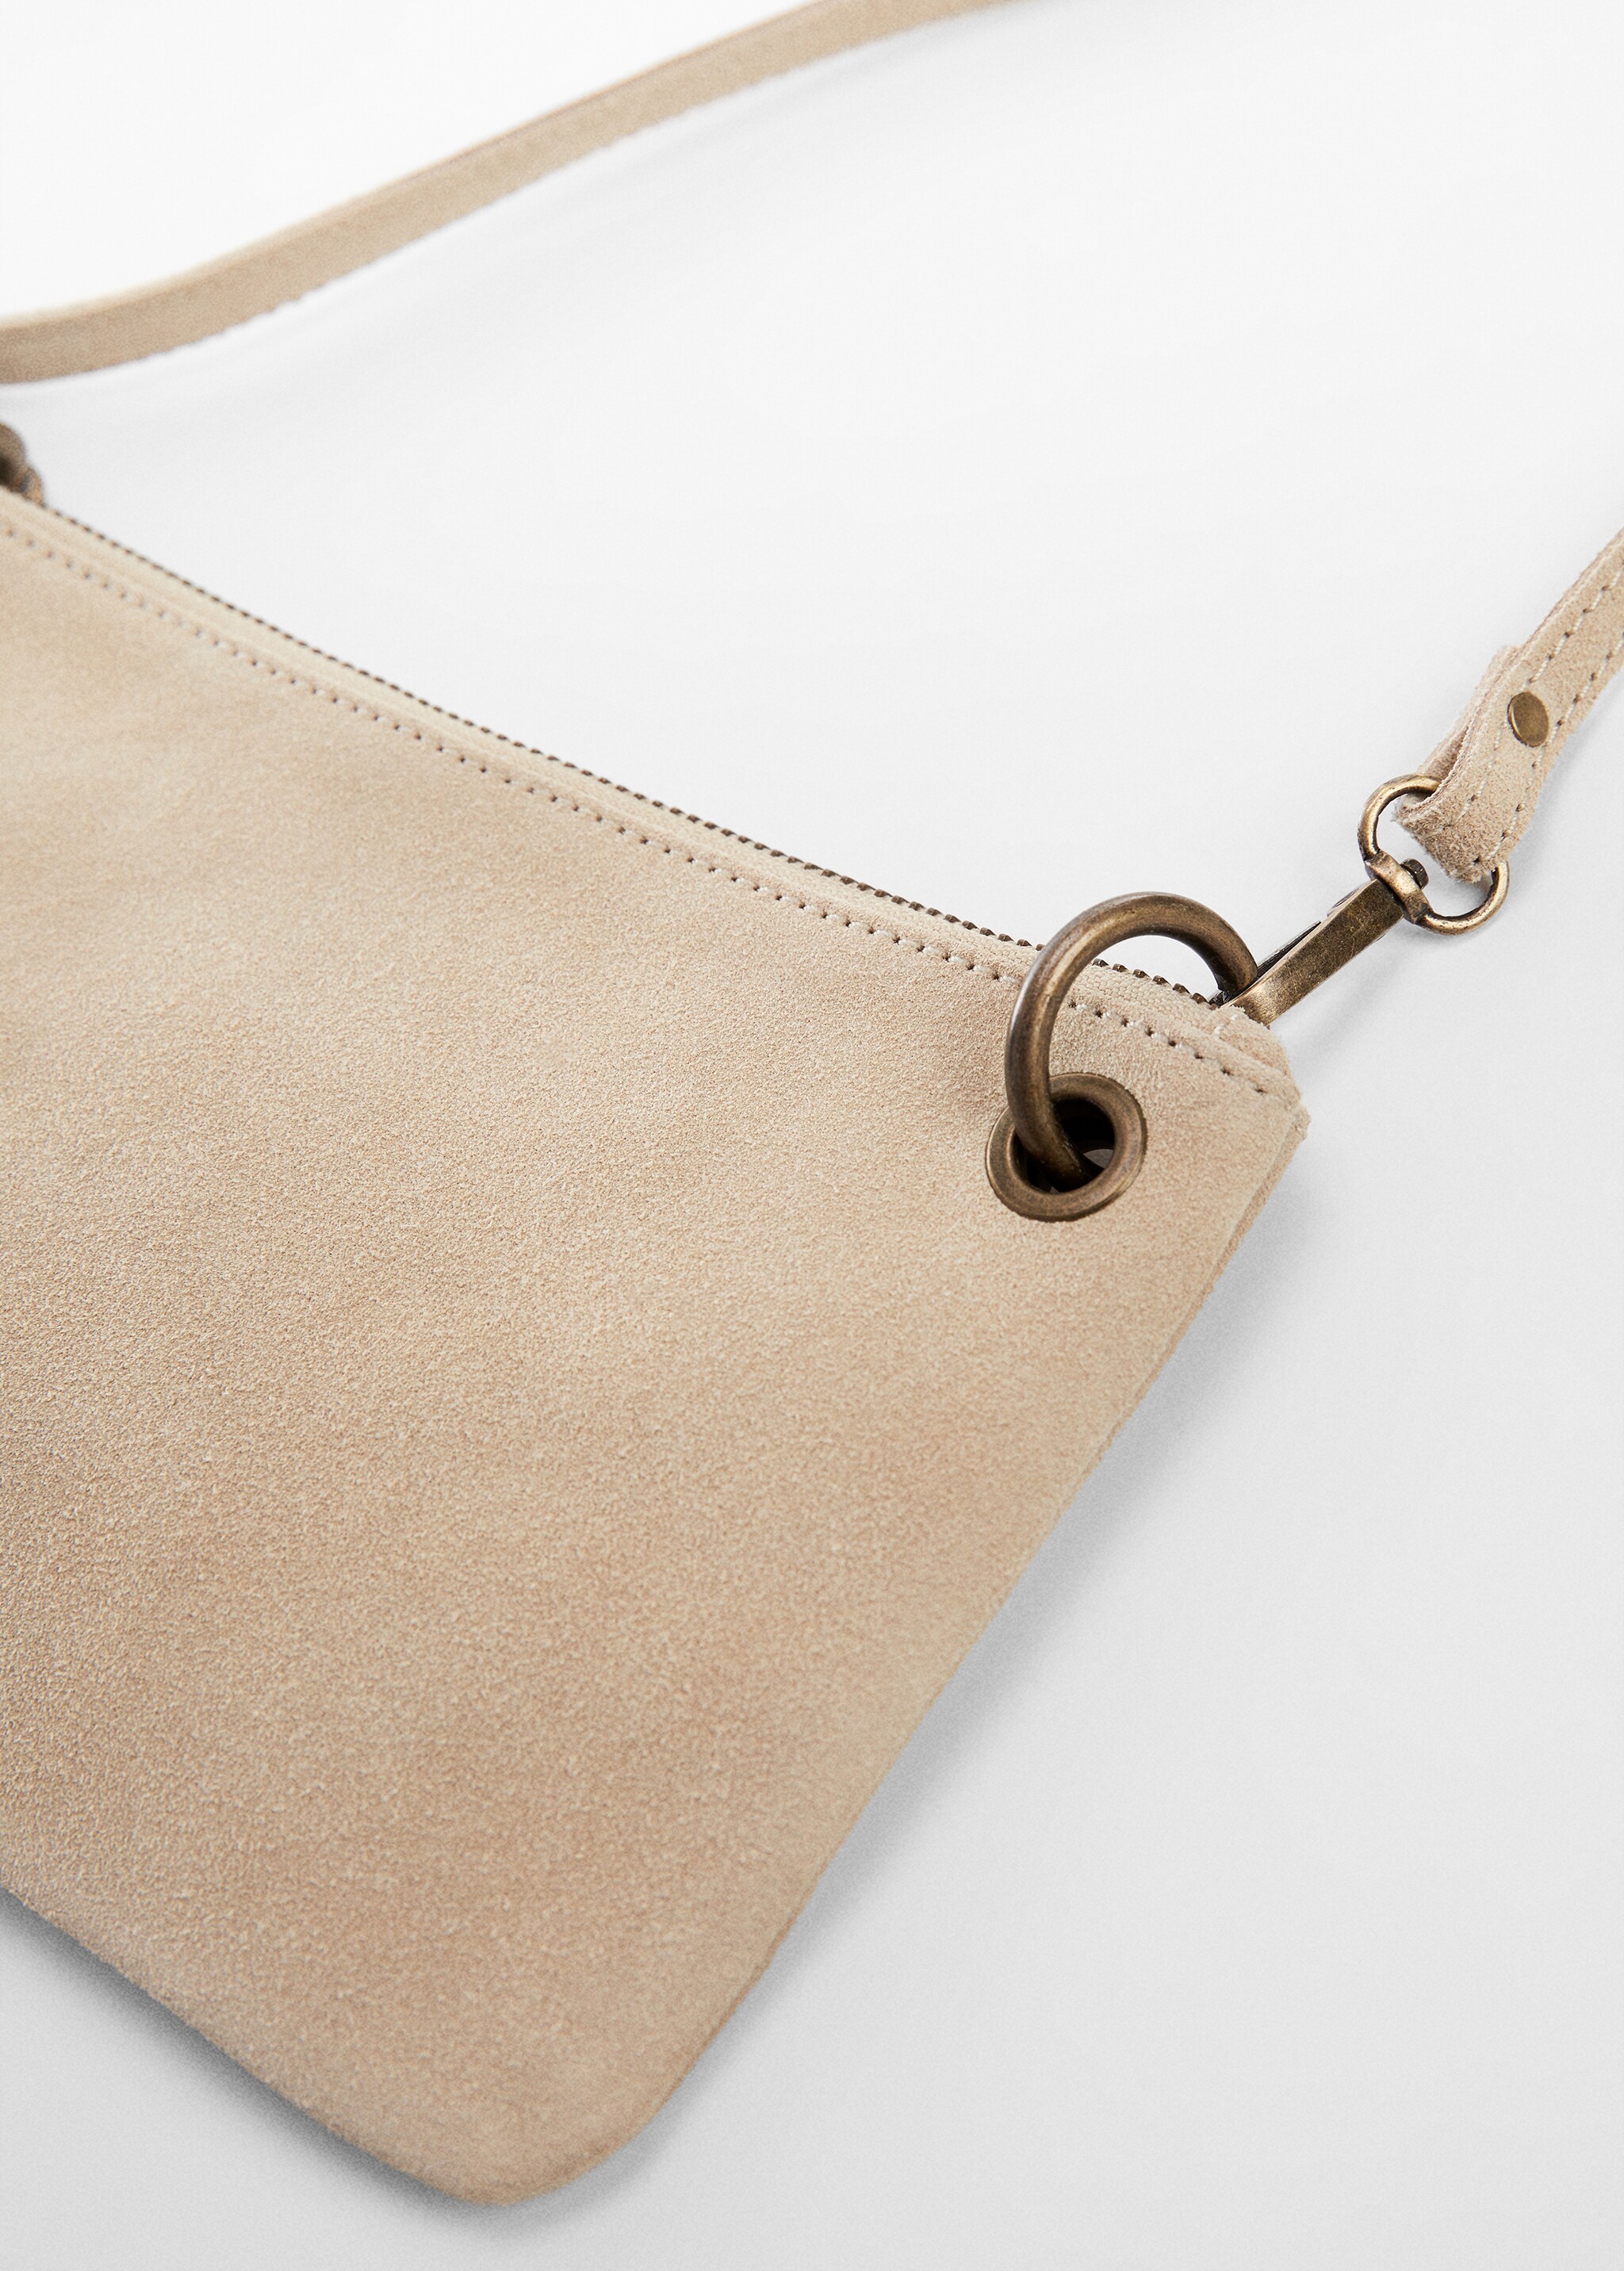 Leather envelope bag - Details of the article 2